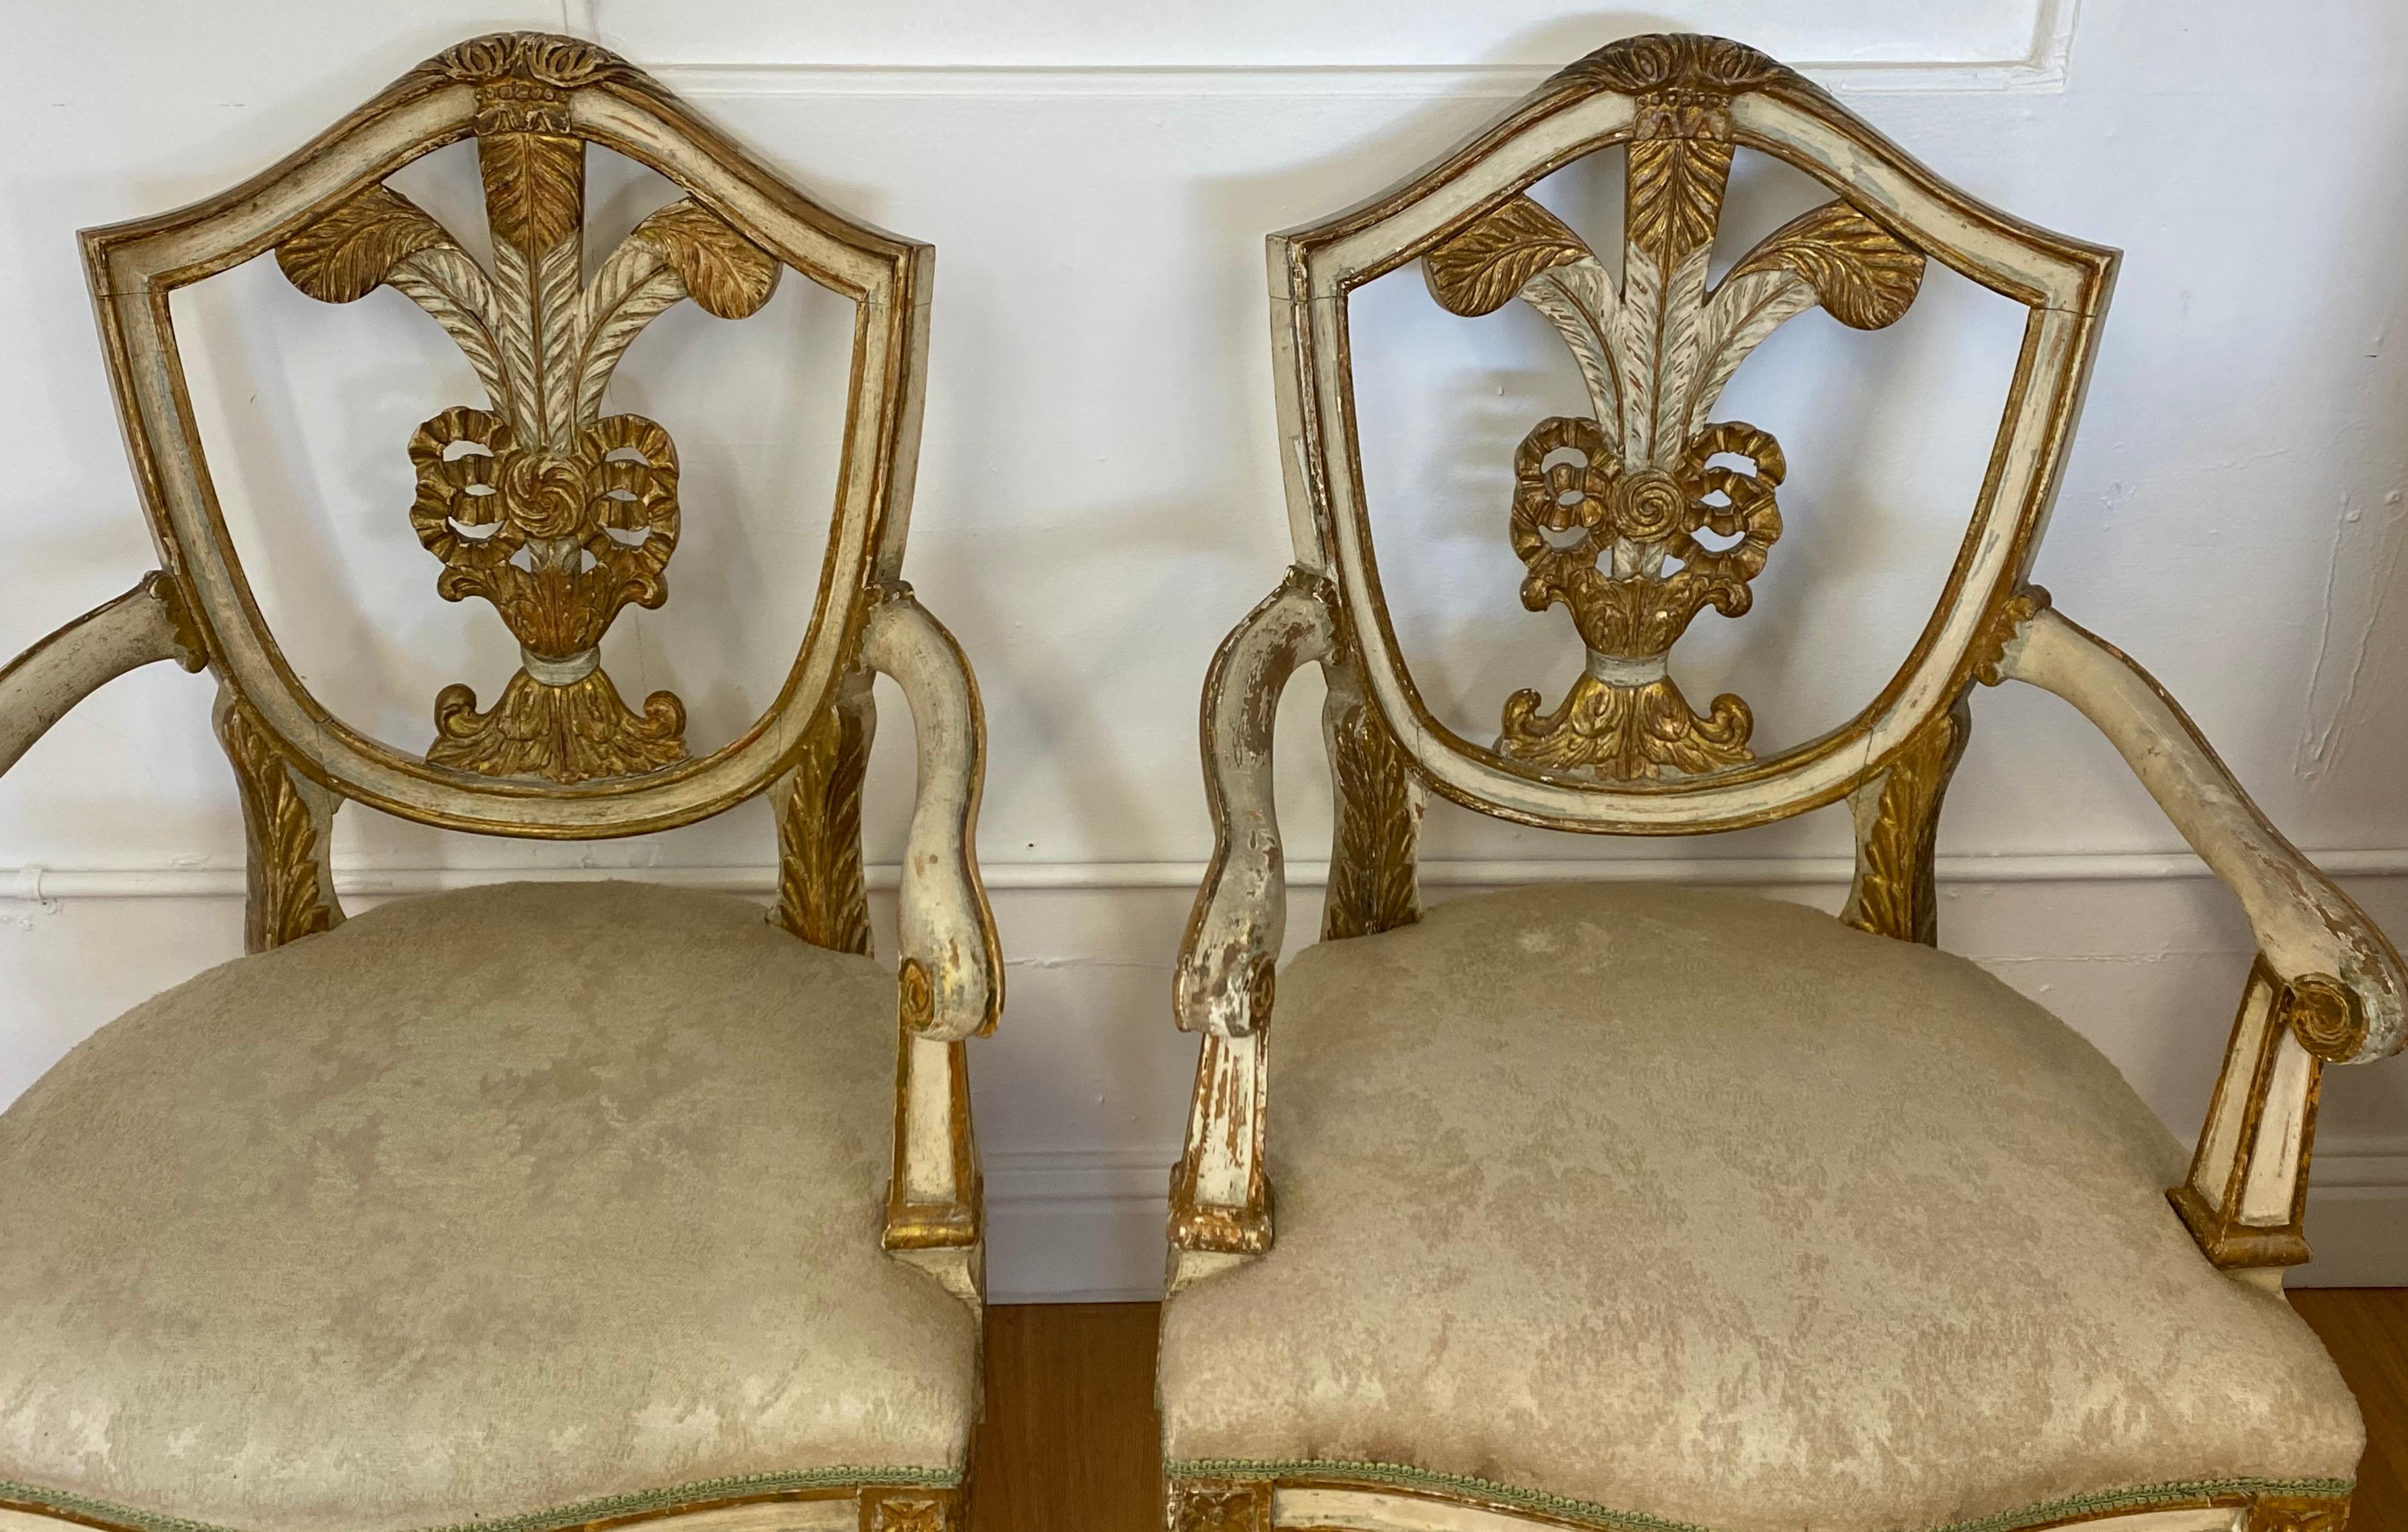 Pair of early 20th century Prince of Wales style arm chairs

Painted eggshell white and gold

Measures: 24